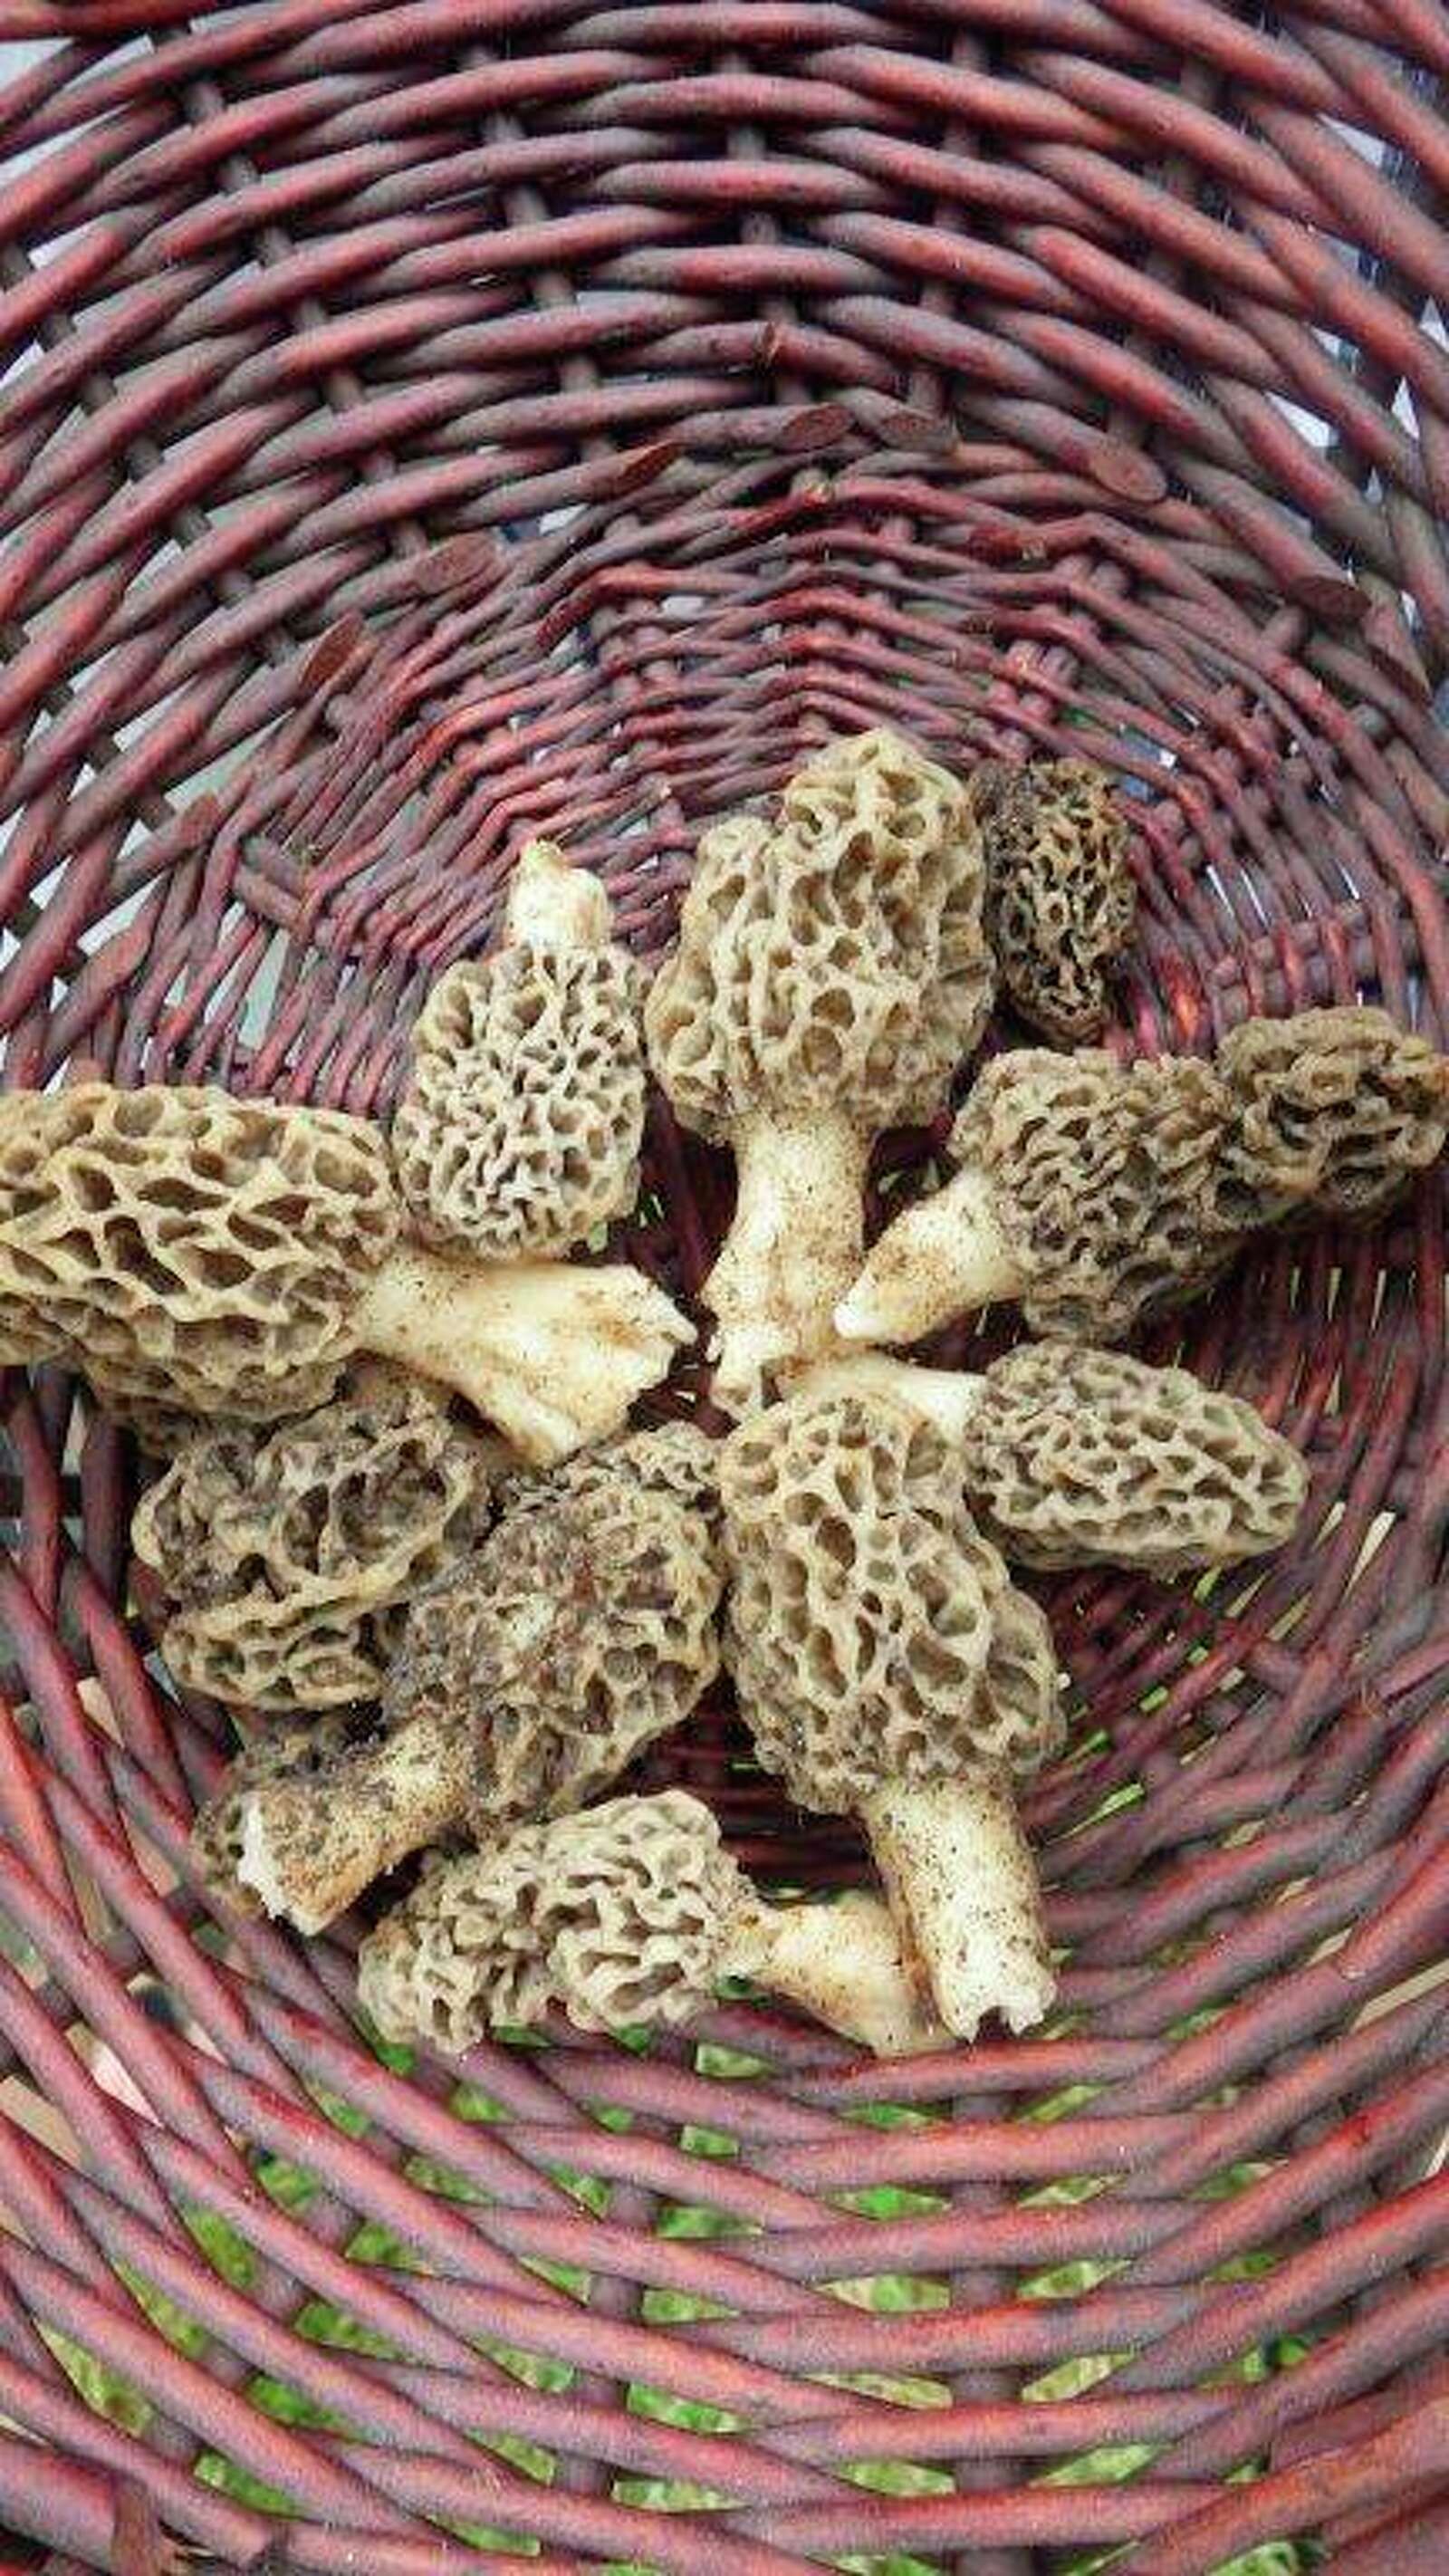 5-things-to-know-about-morel-mushroom-hunting-1.jpg